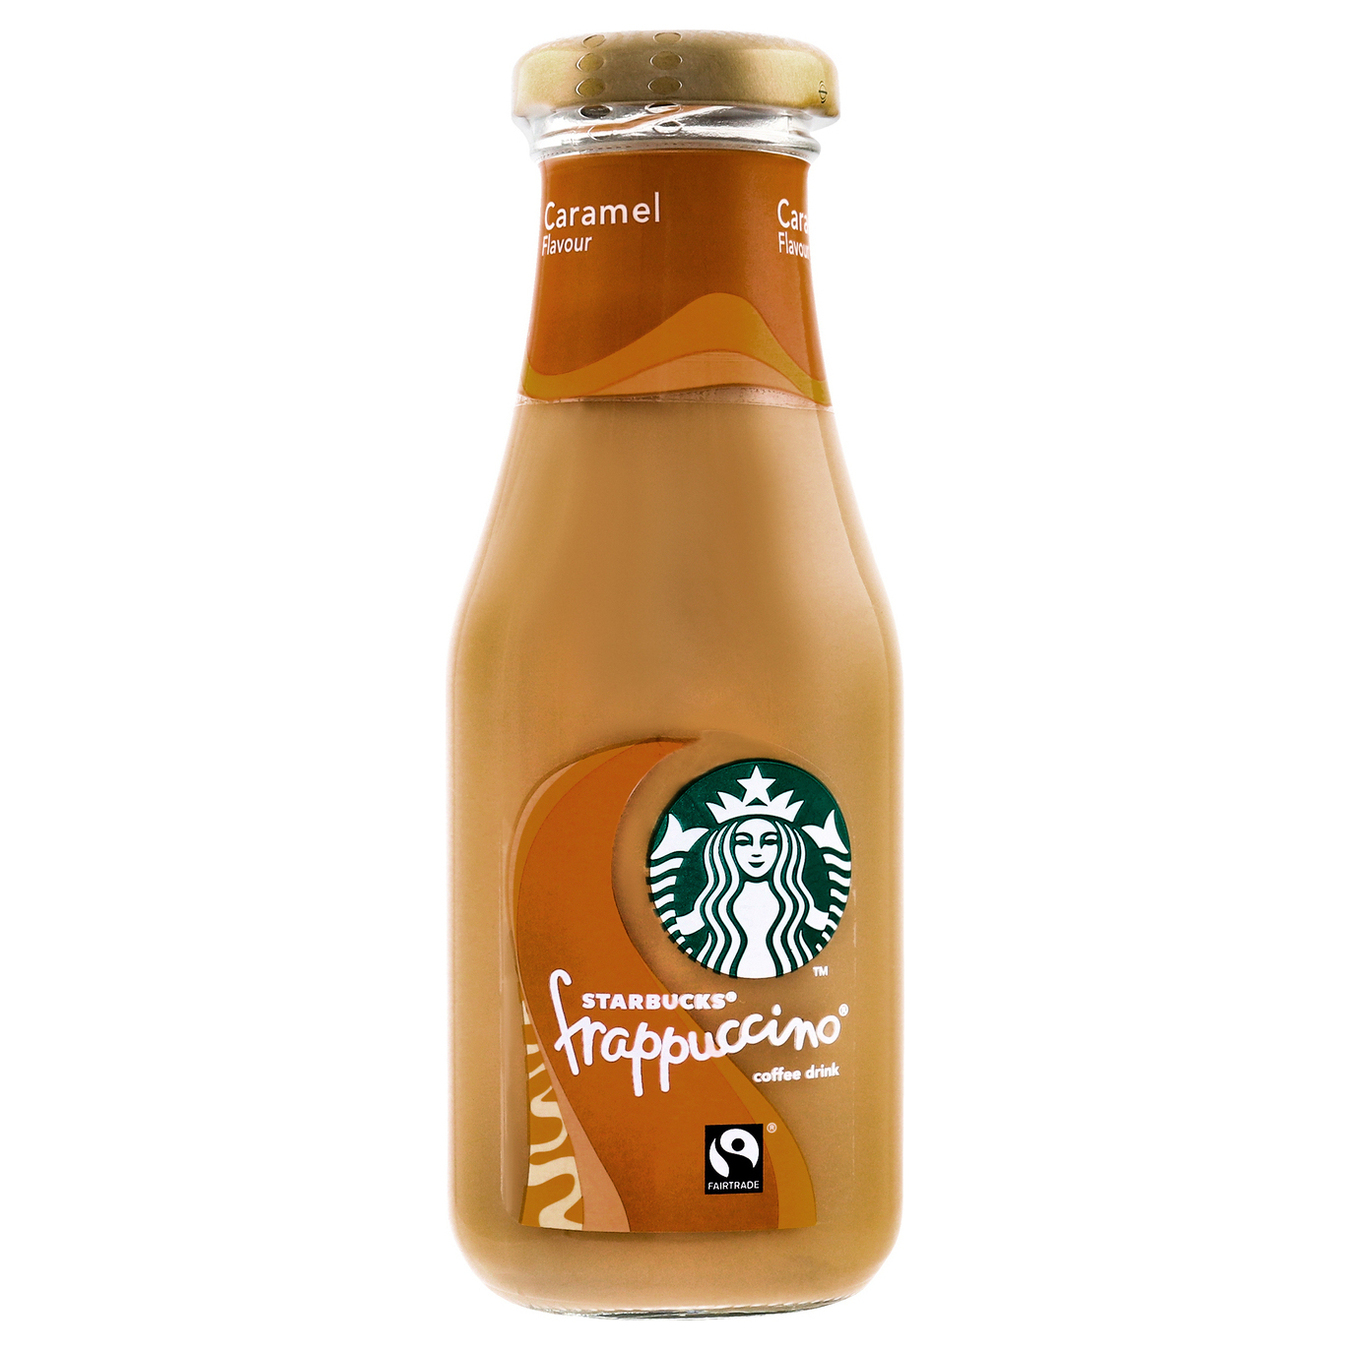 Starbucks Arabica Milk drink with caramel aroma and coffee pasteurized 250 ml